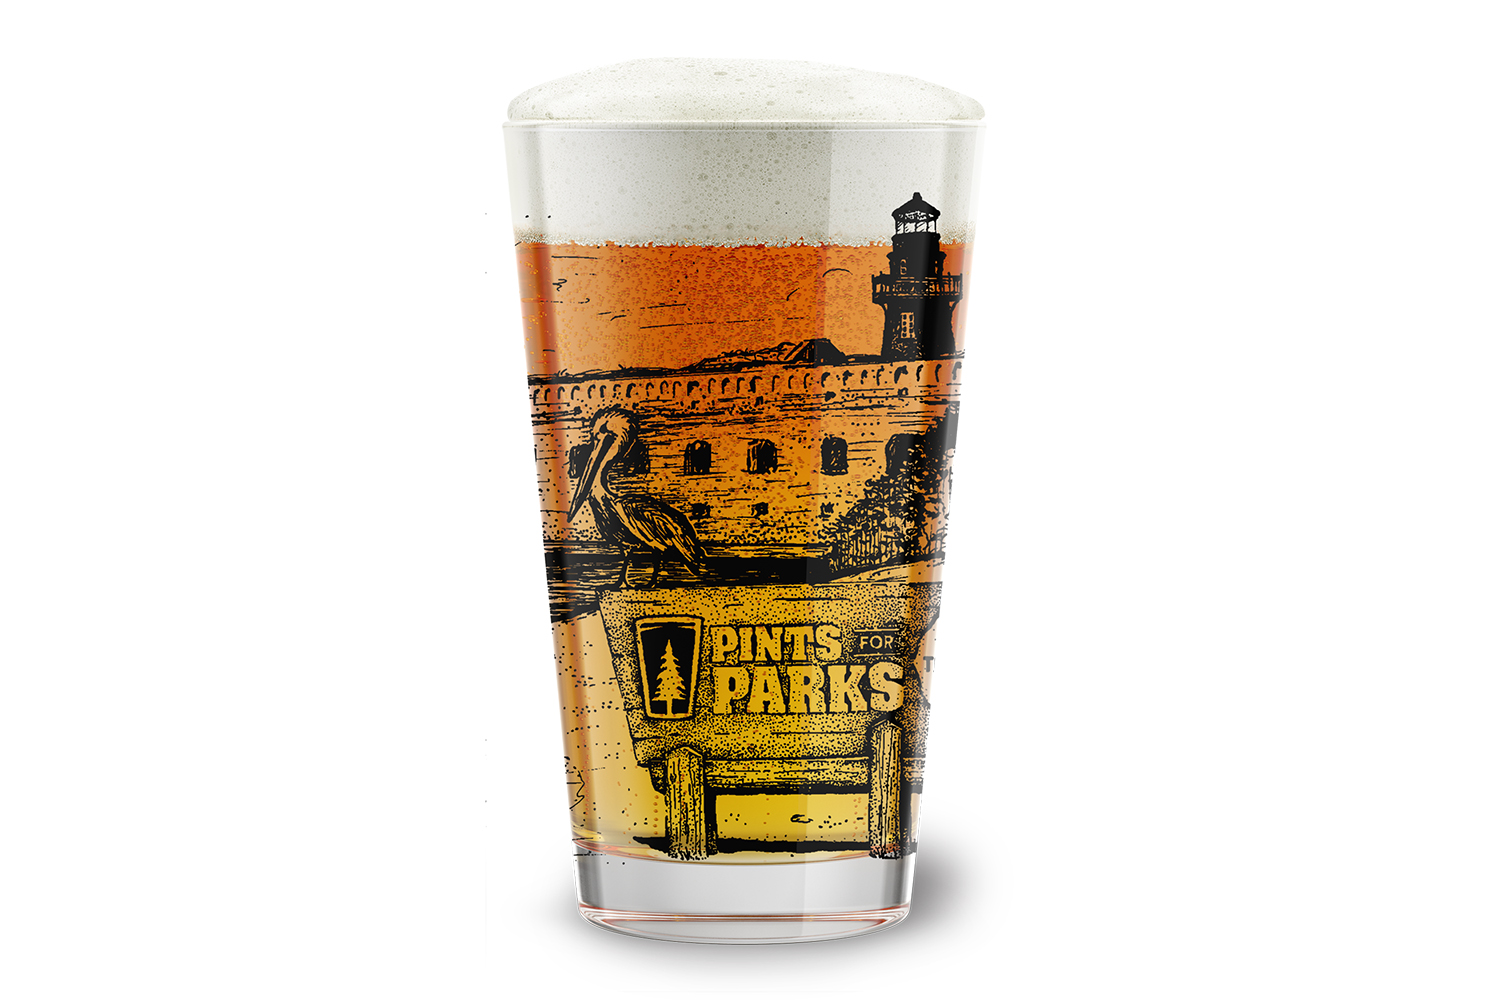 Pints for Parks Dry Tortugas